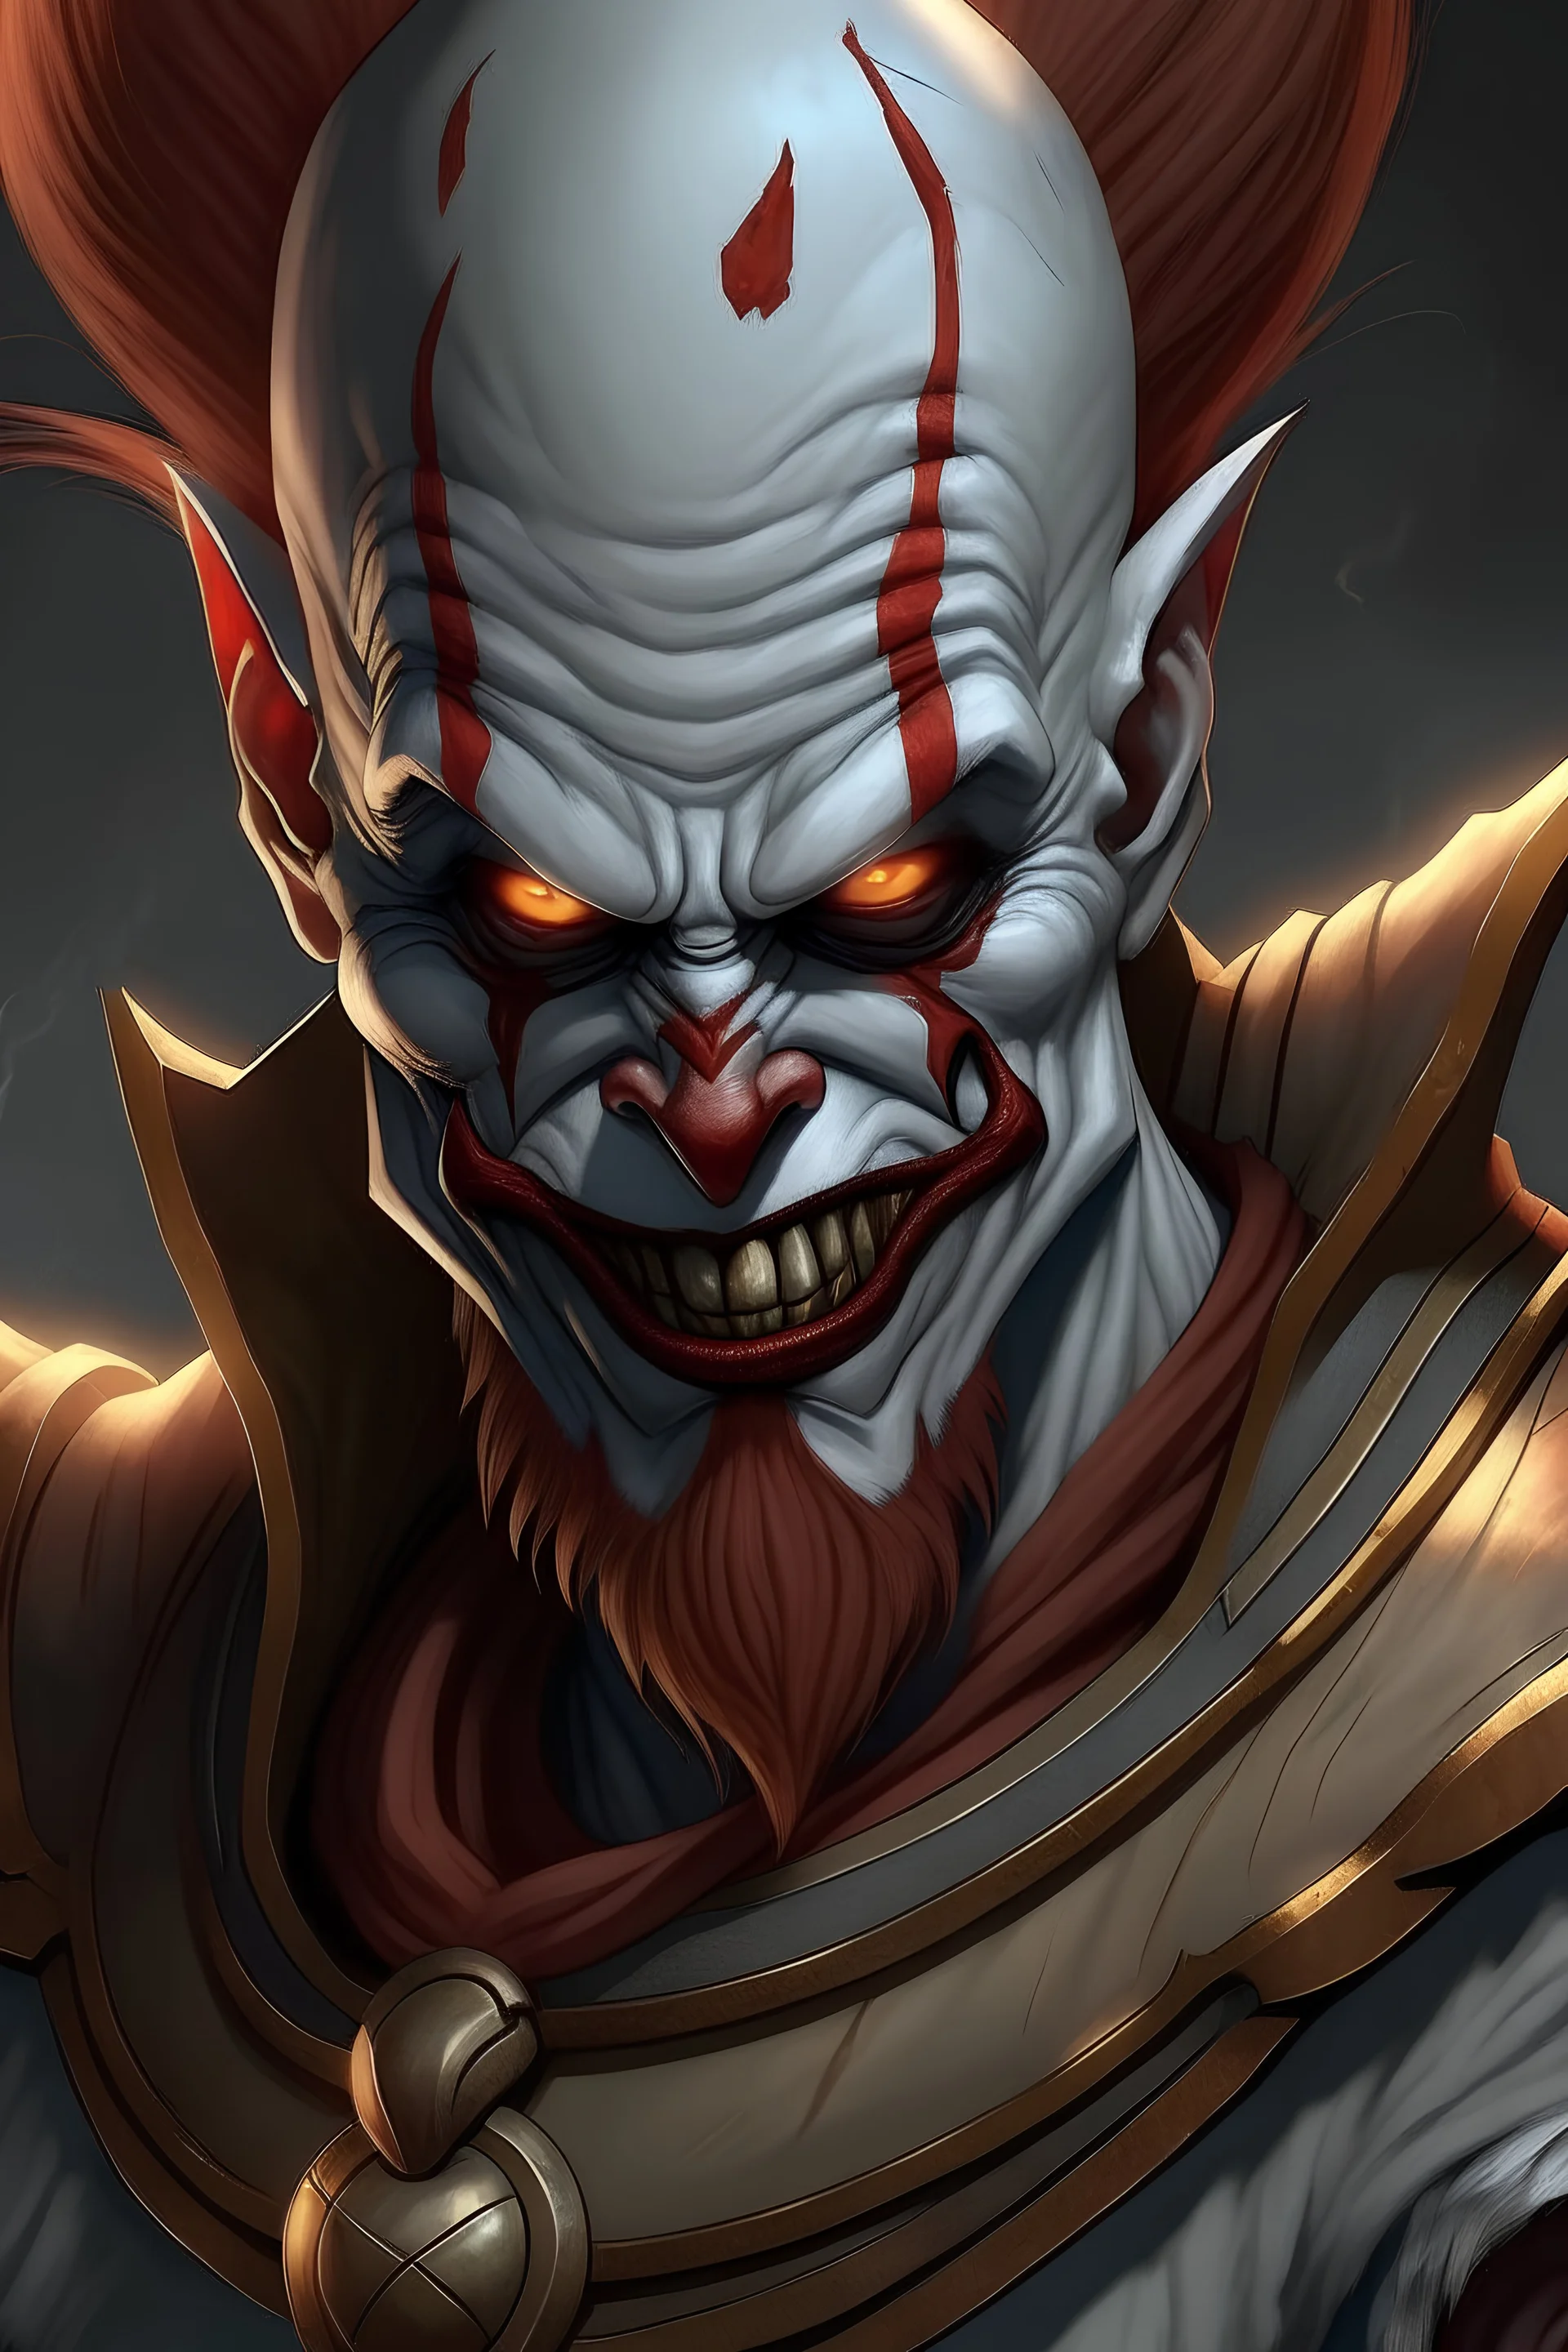 COMBINE PENNYWISE WITH KRATOS